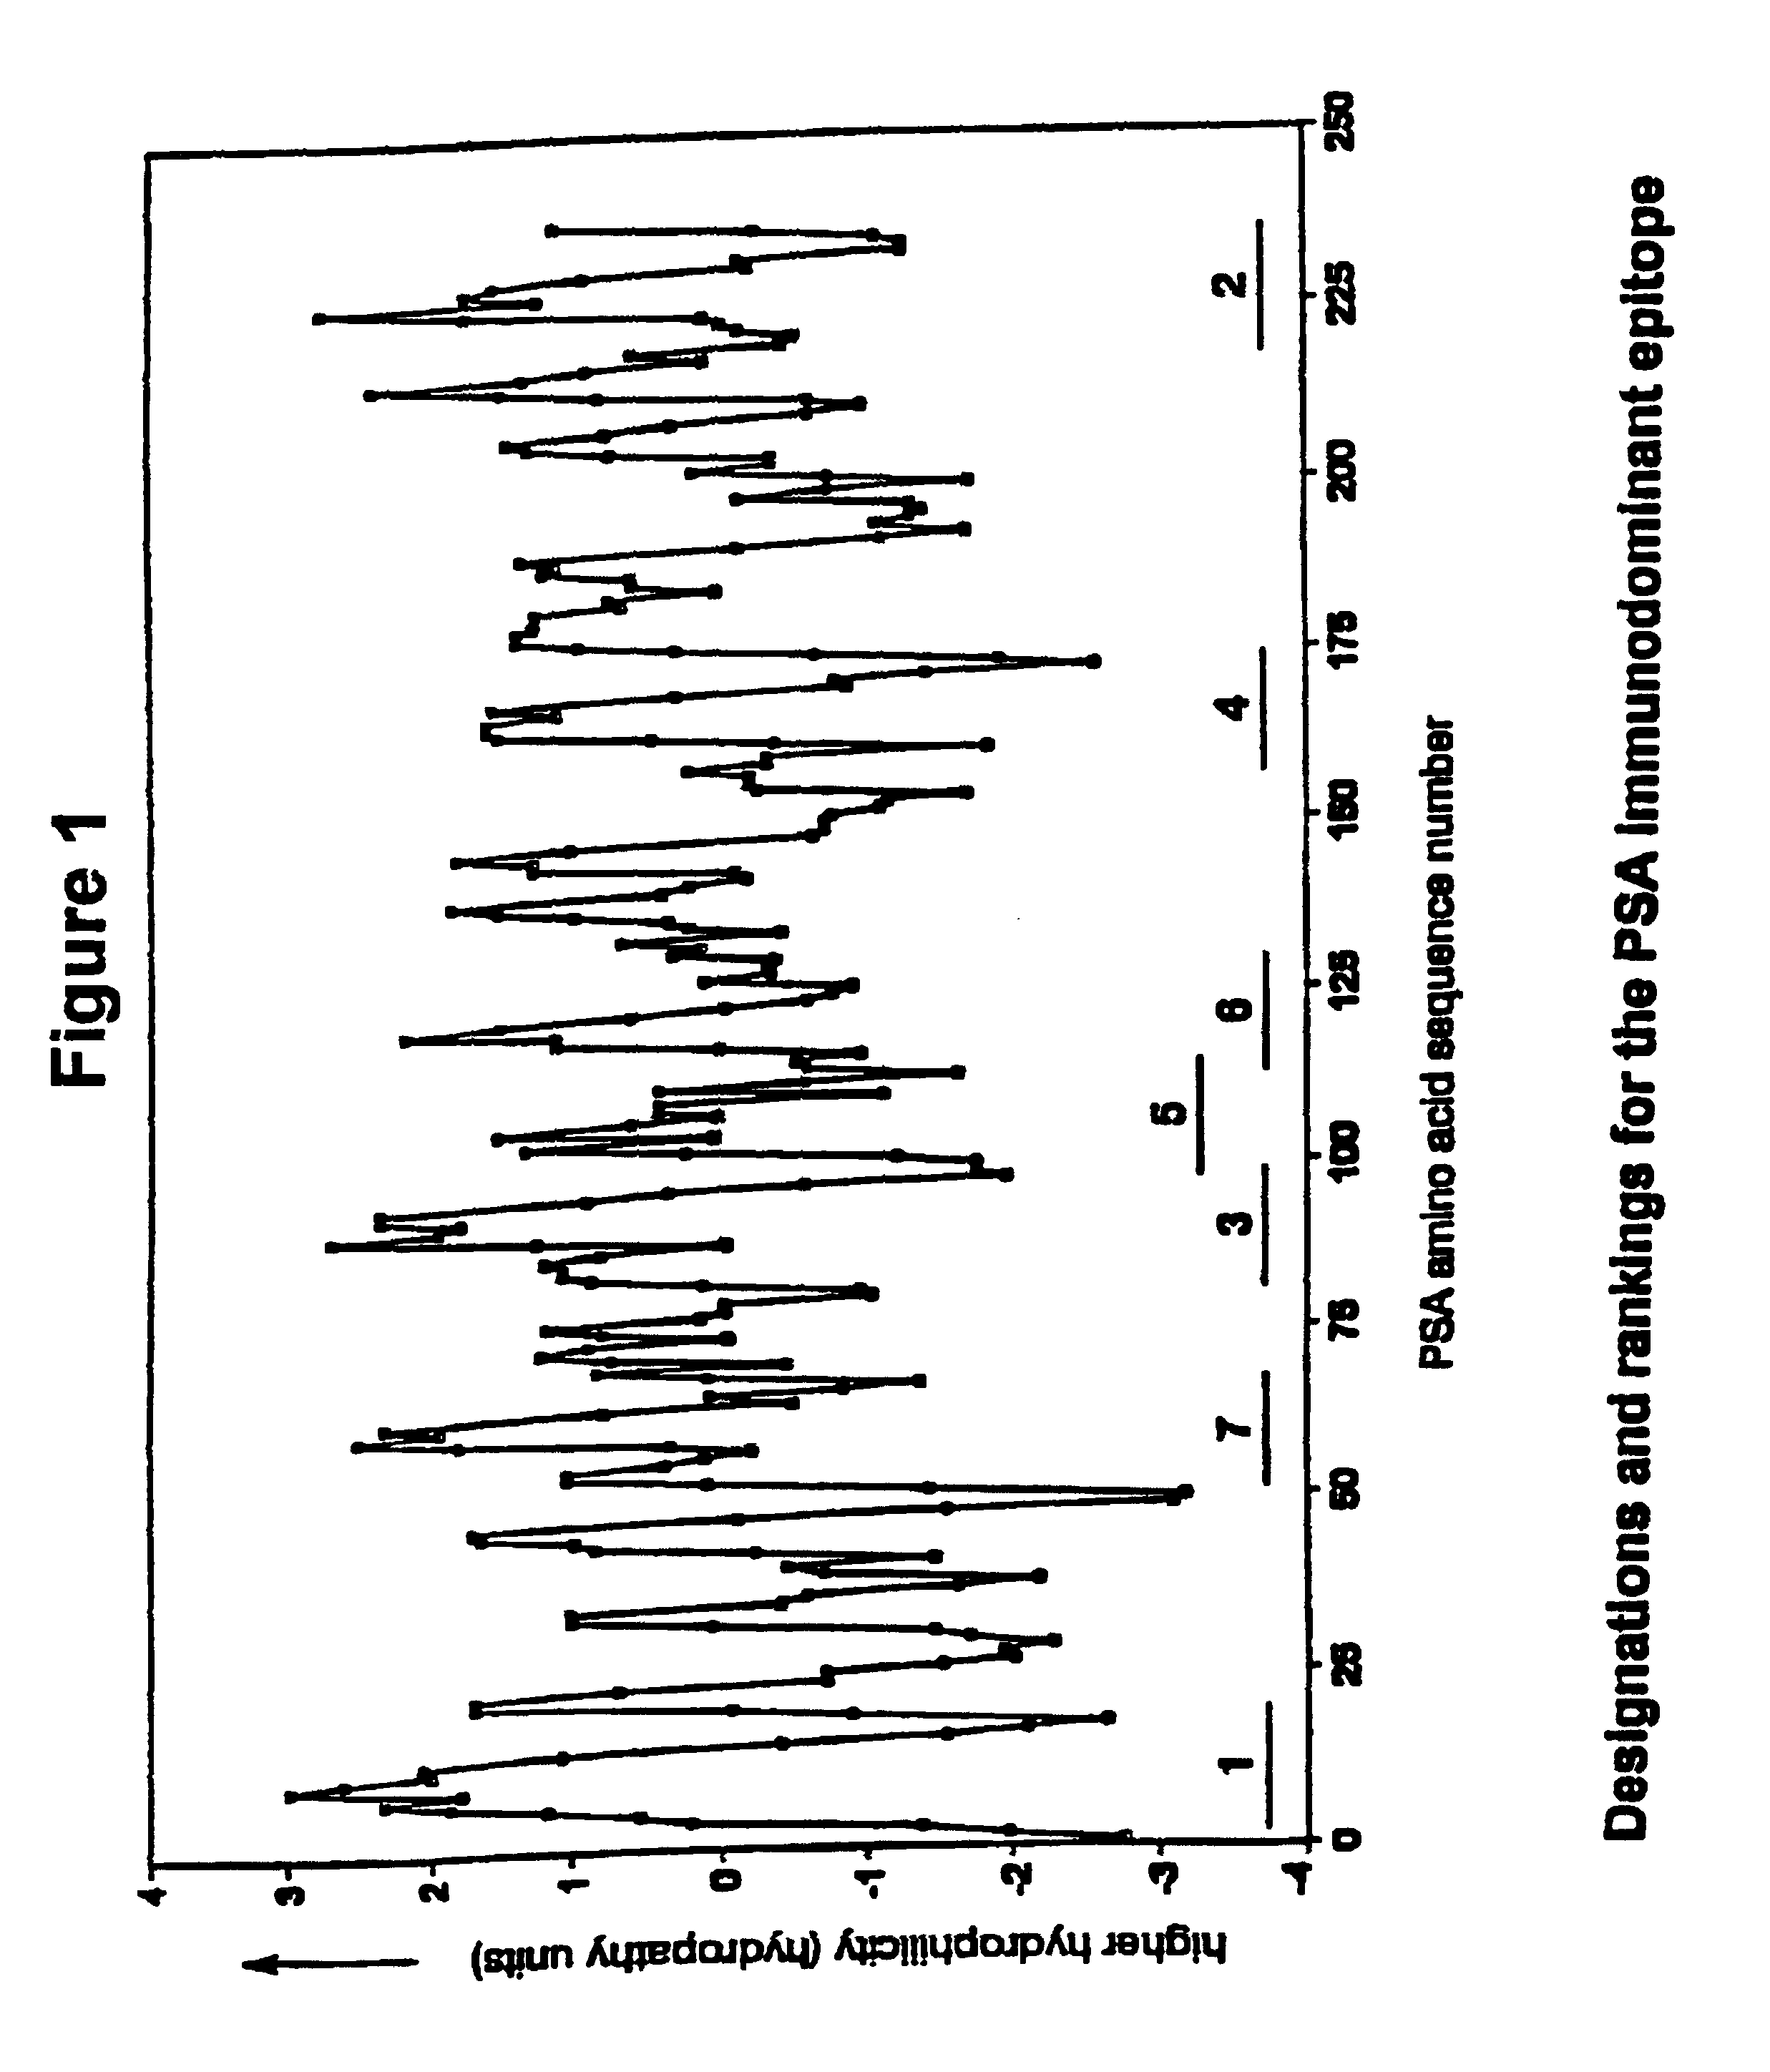 Method of identifying and locating immunobiologically-active linear peptides